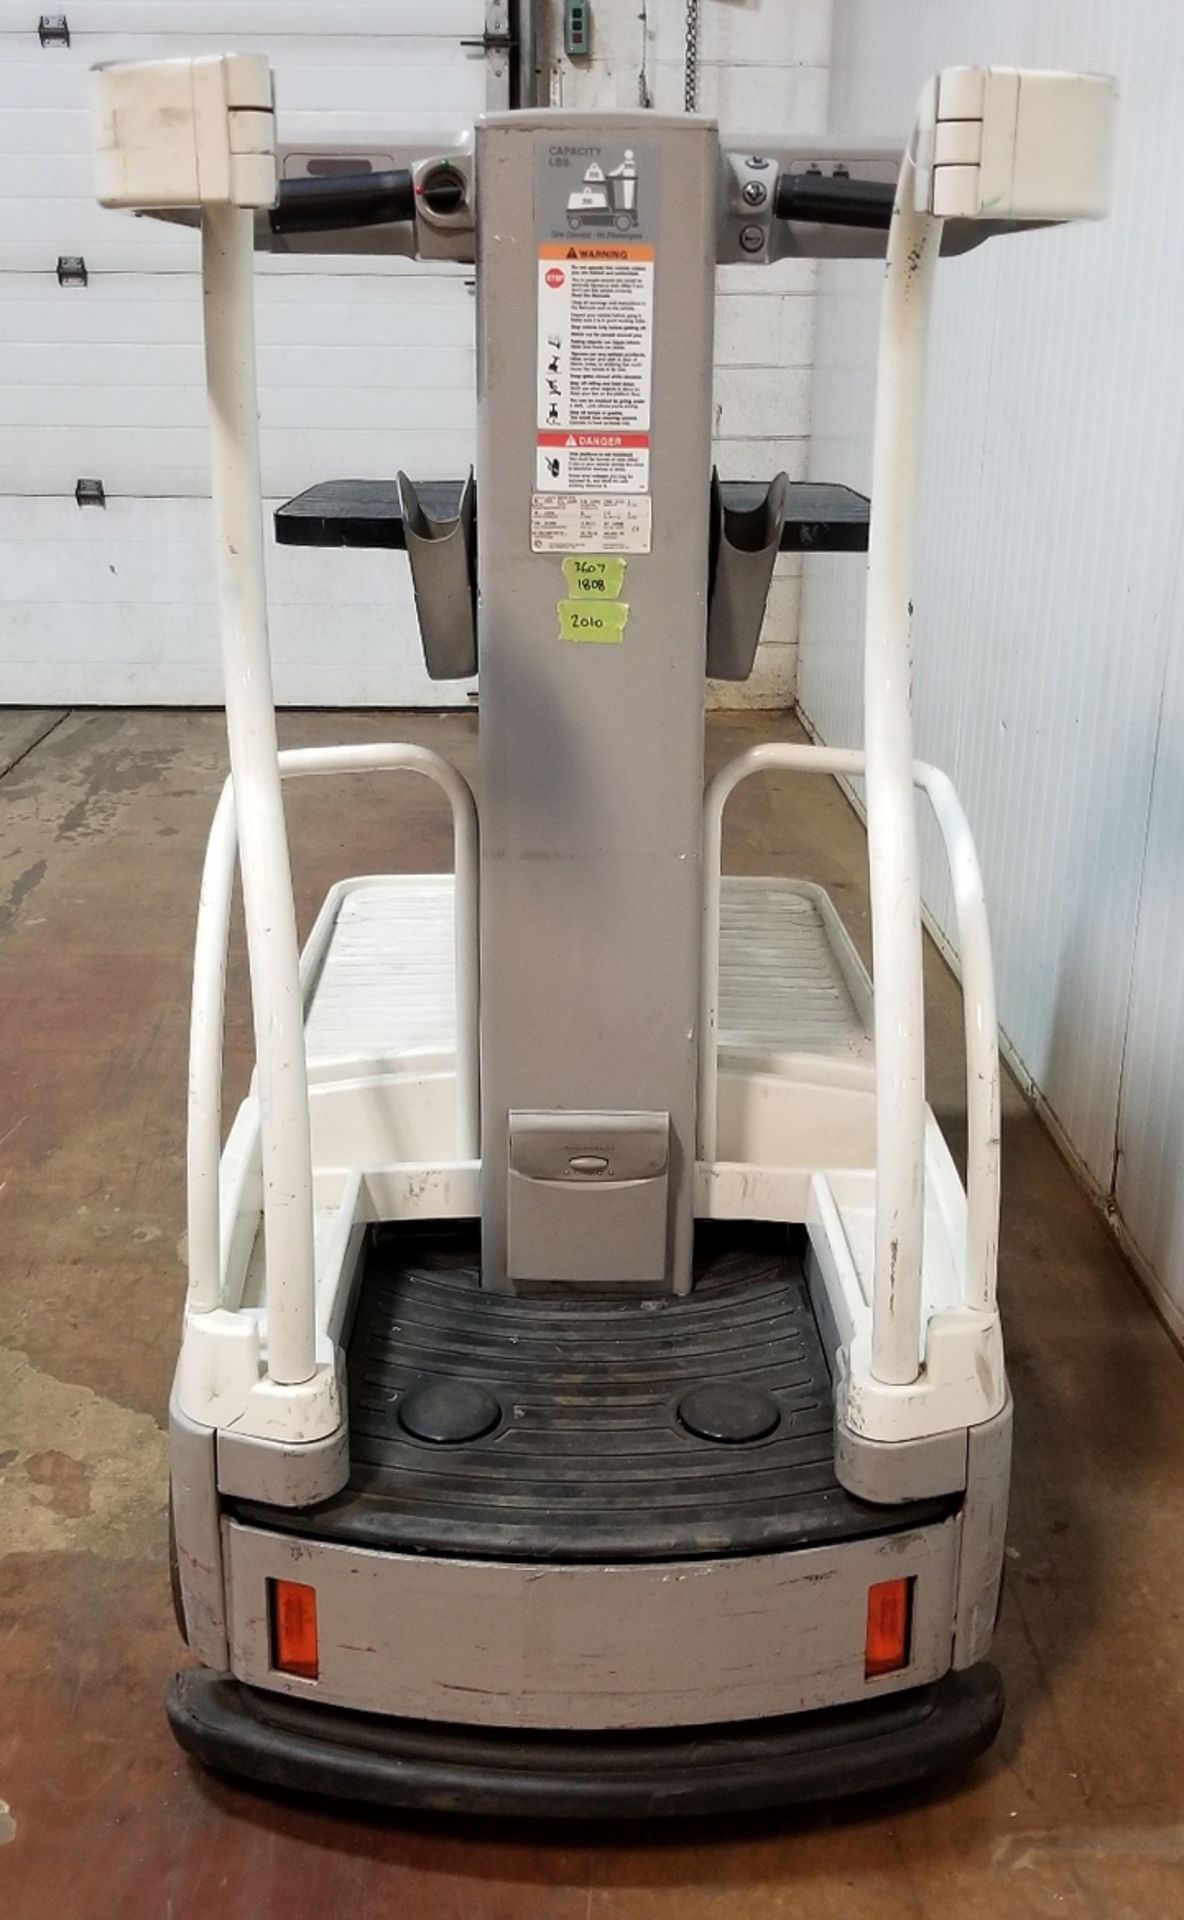 CROWN (2010) WAV50-118 450 LB. CAPACITY 24V ELECTRIC ORDER PICKER WITH 118" MAX. LIFT HEIGHT, 120V - Image 4 of 4